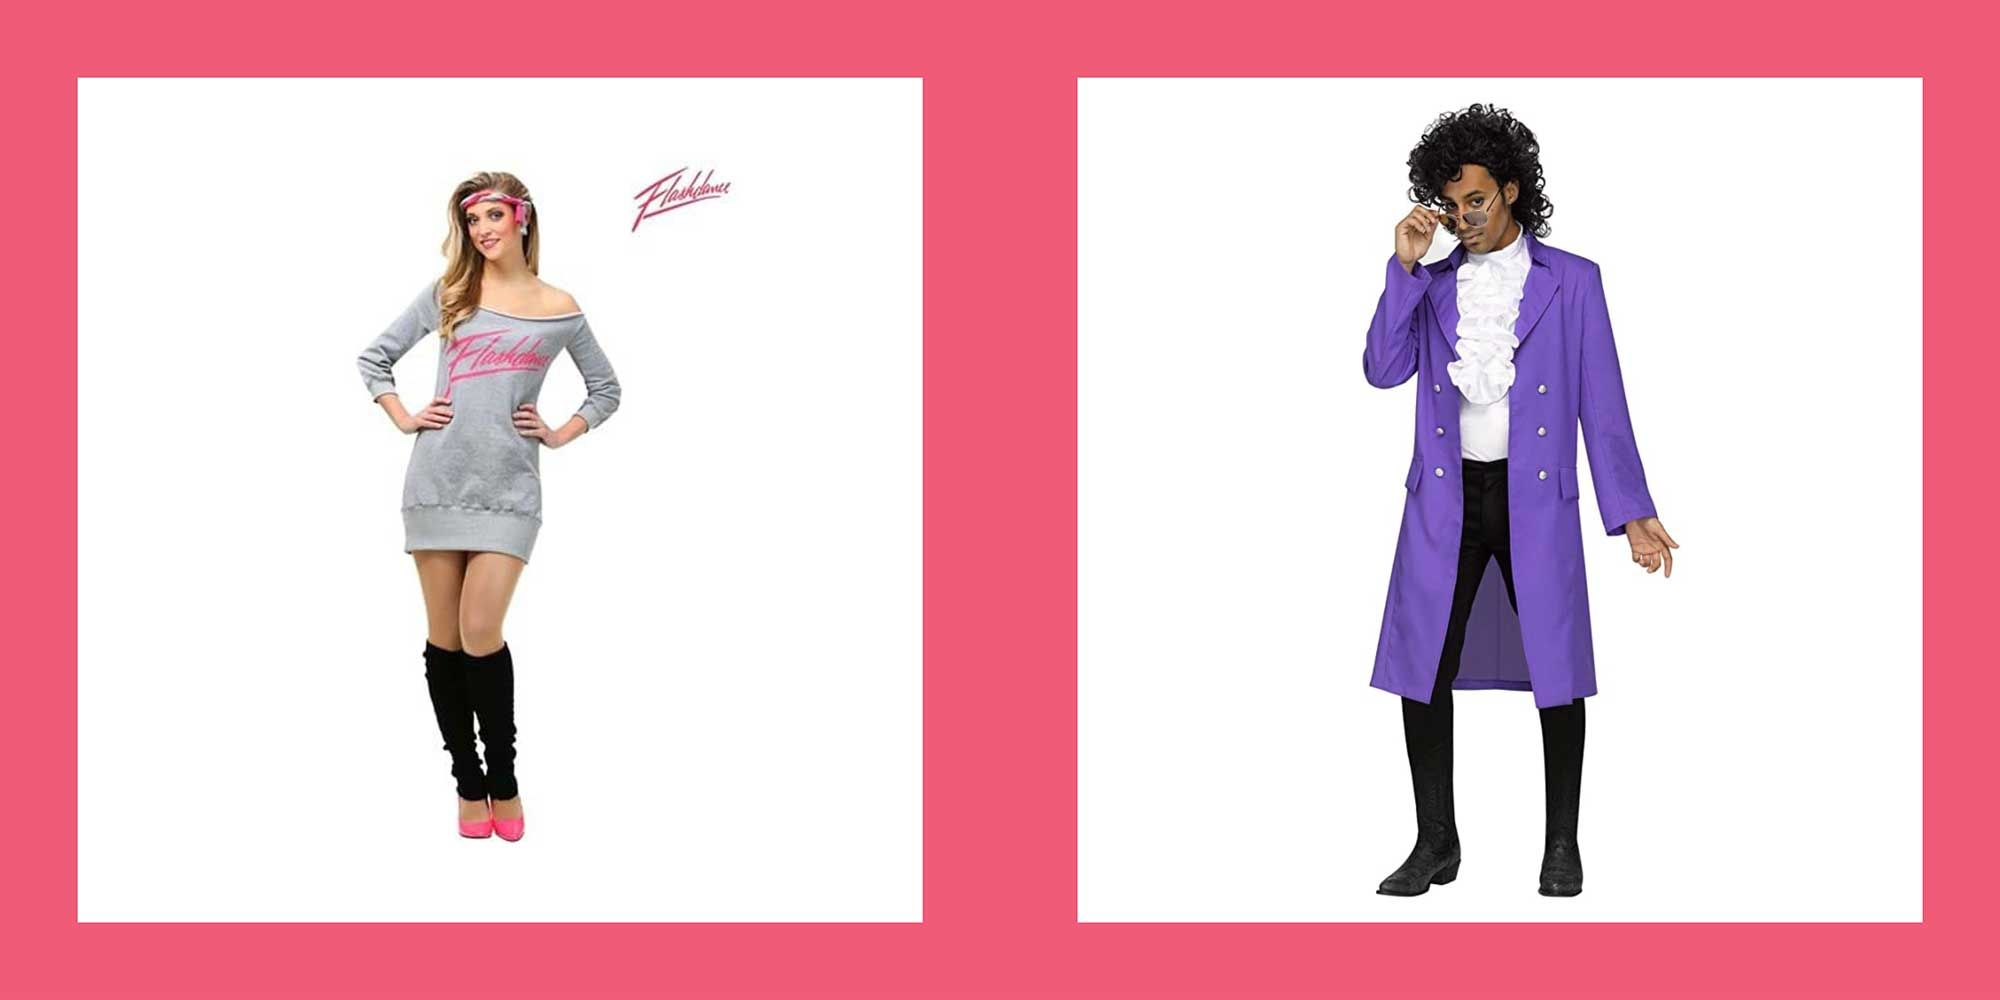 dress up ideas for the 80s